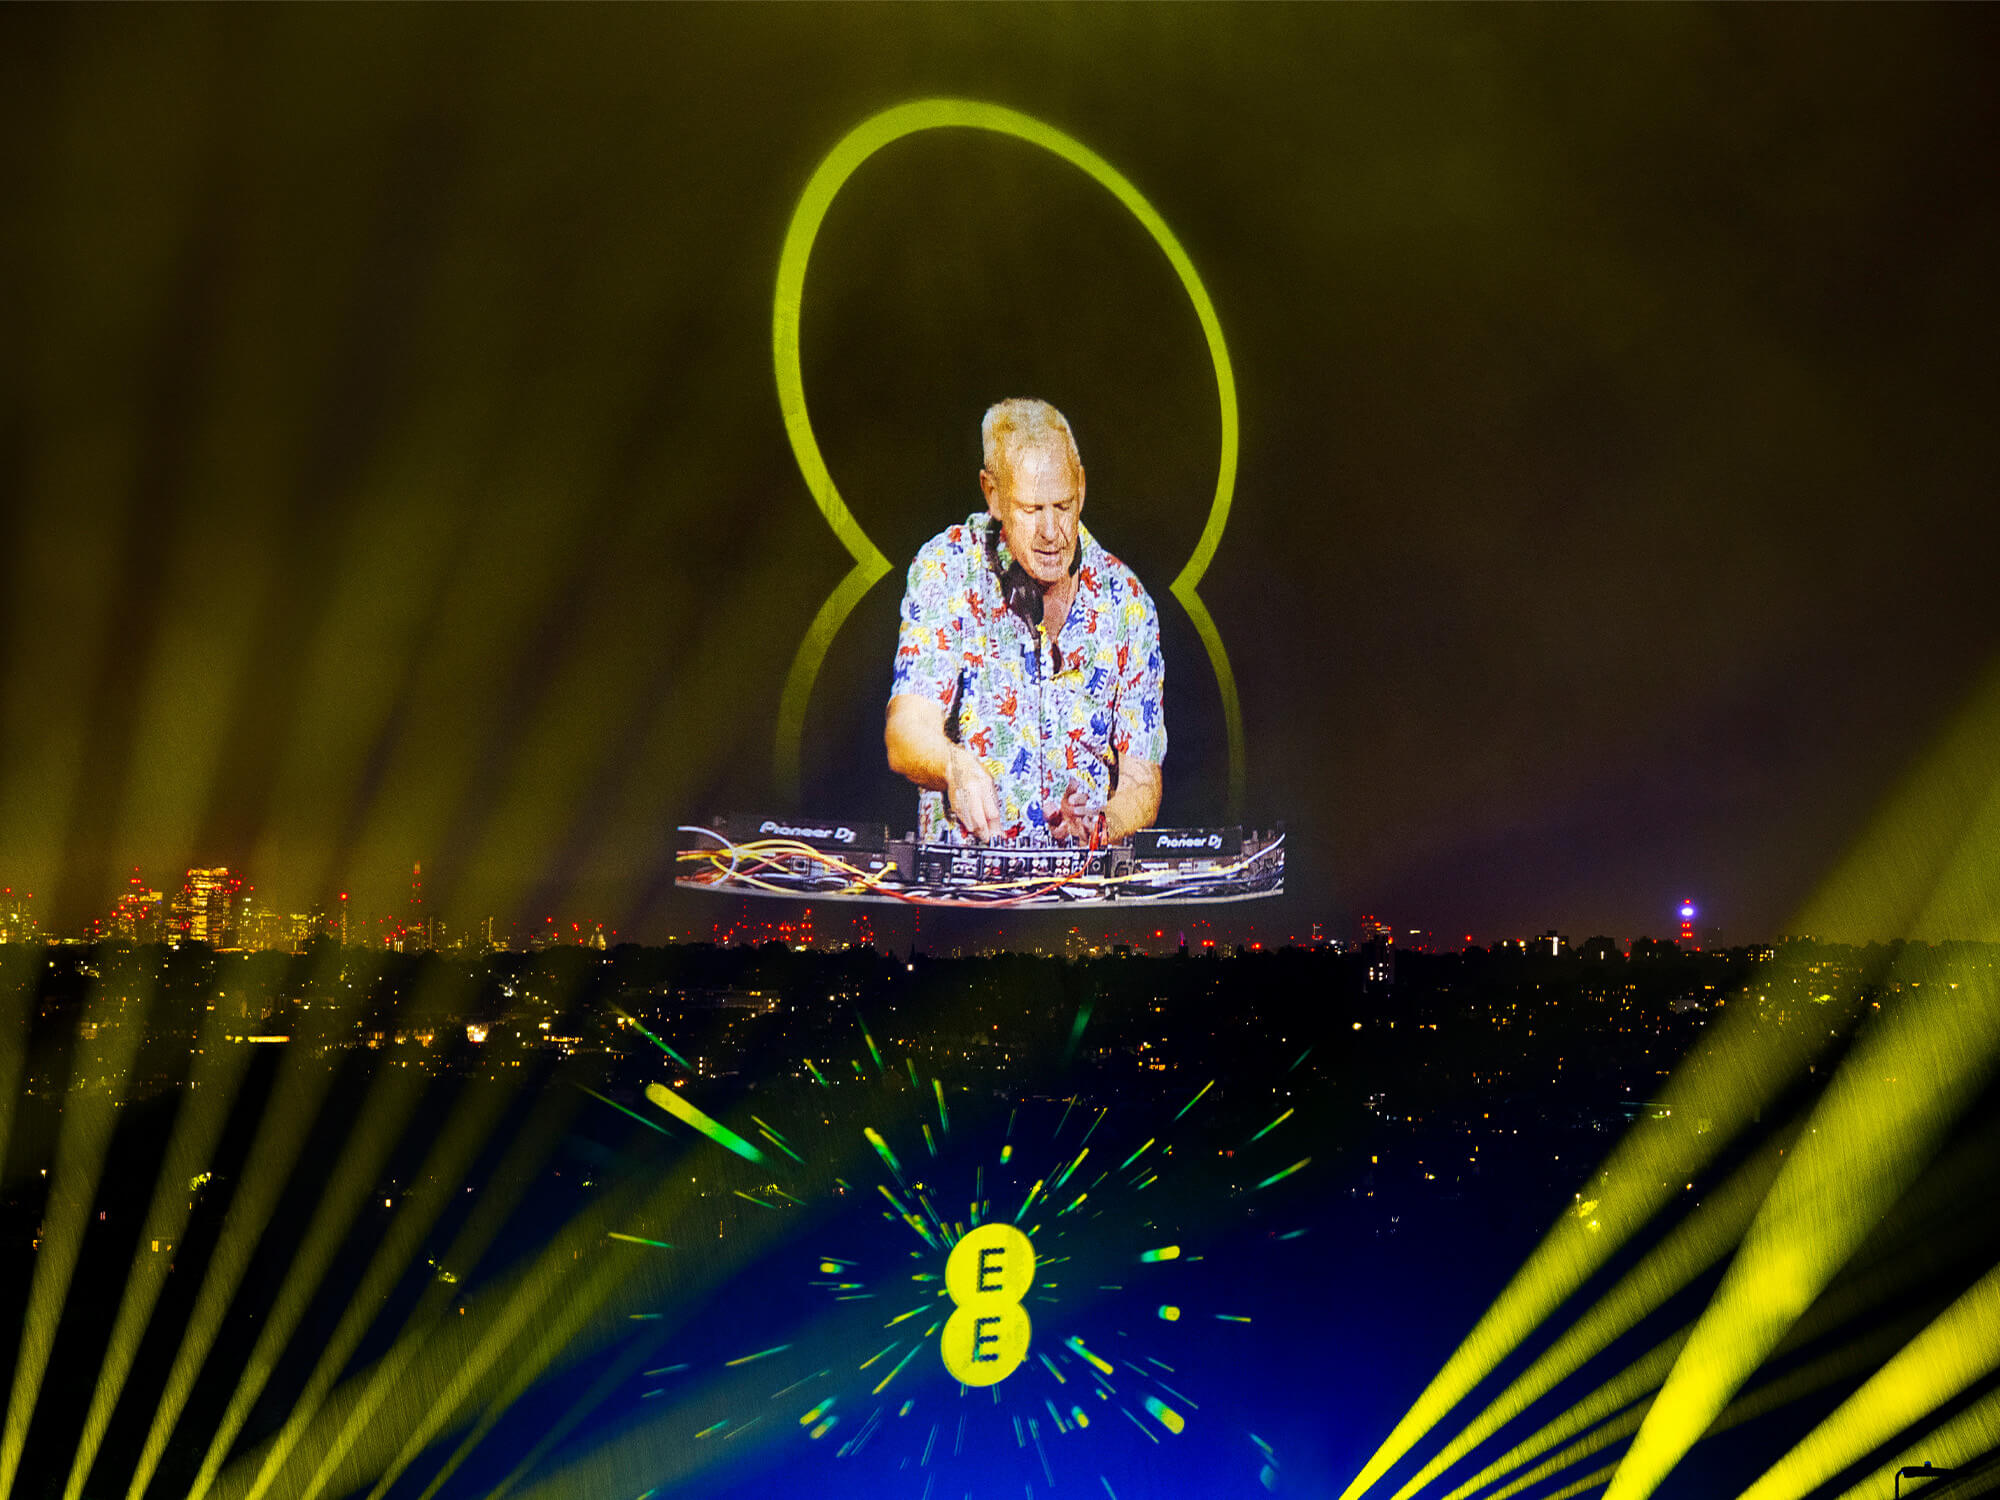 Fatboy Slim's hologram projected into the sky among yellow lights. He is stood behind decks, looking down and wearing headphones around his neck.